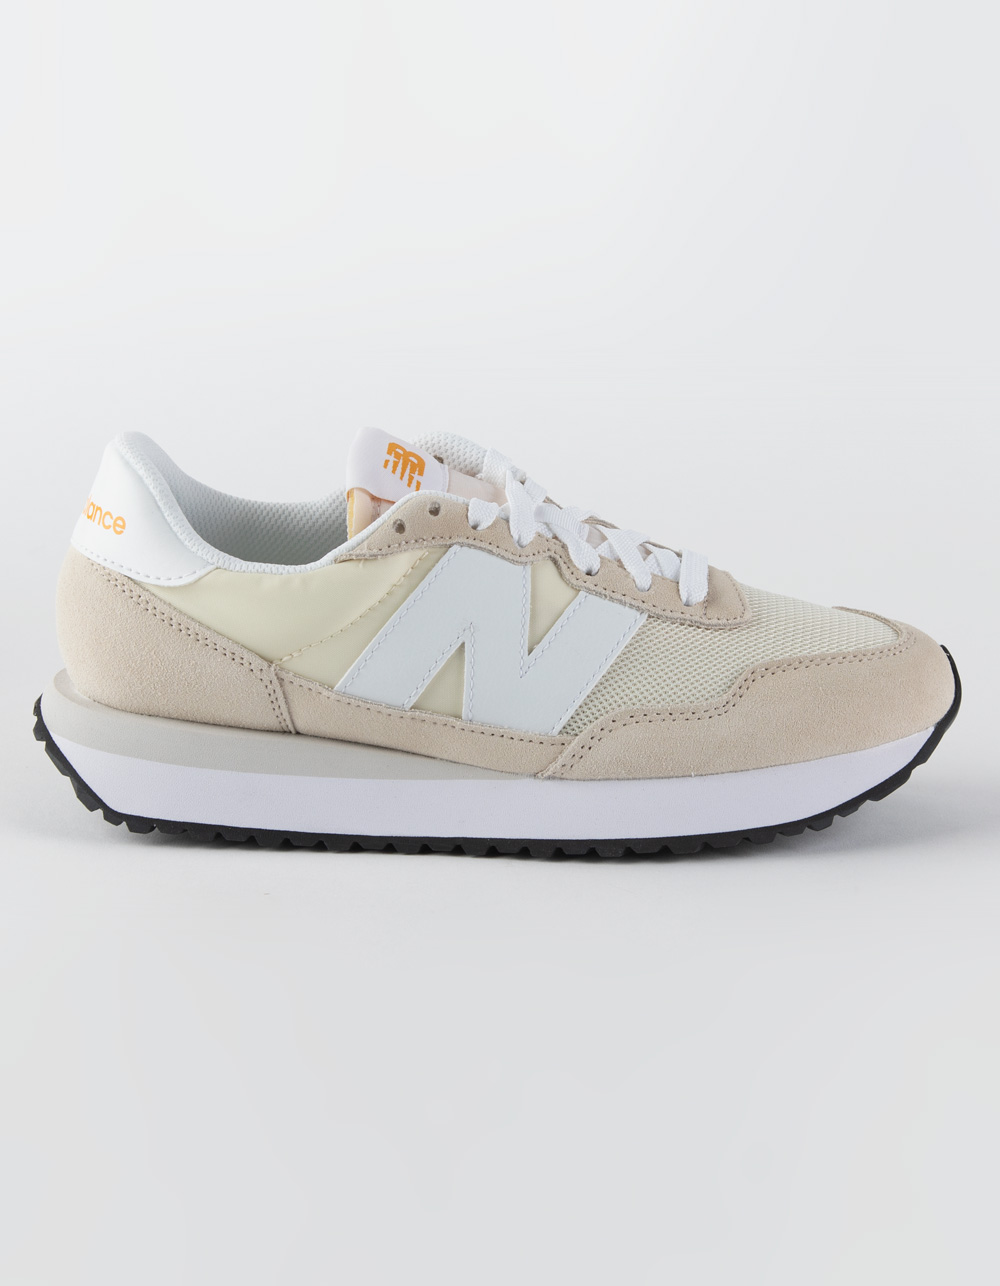 NEW BALANCE 237 Womens Shoes - TAUPE | Tillys